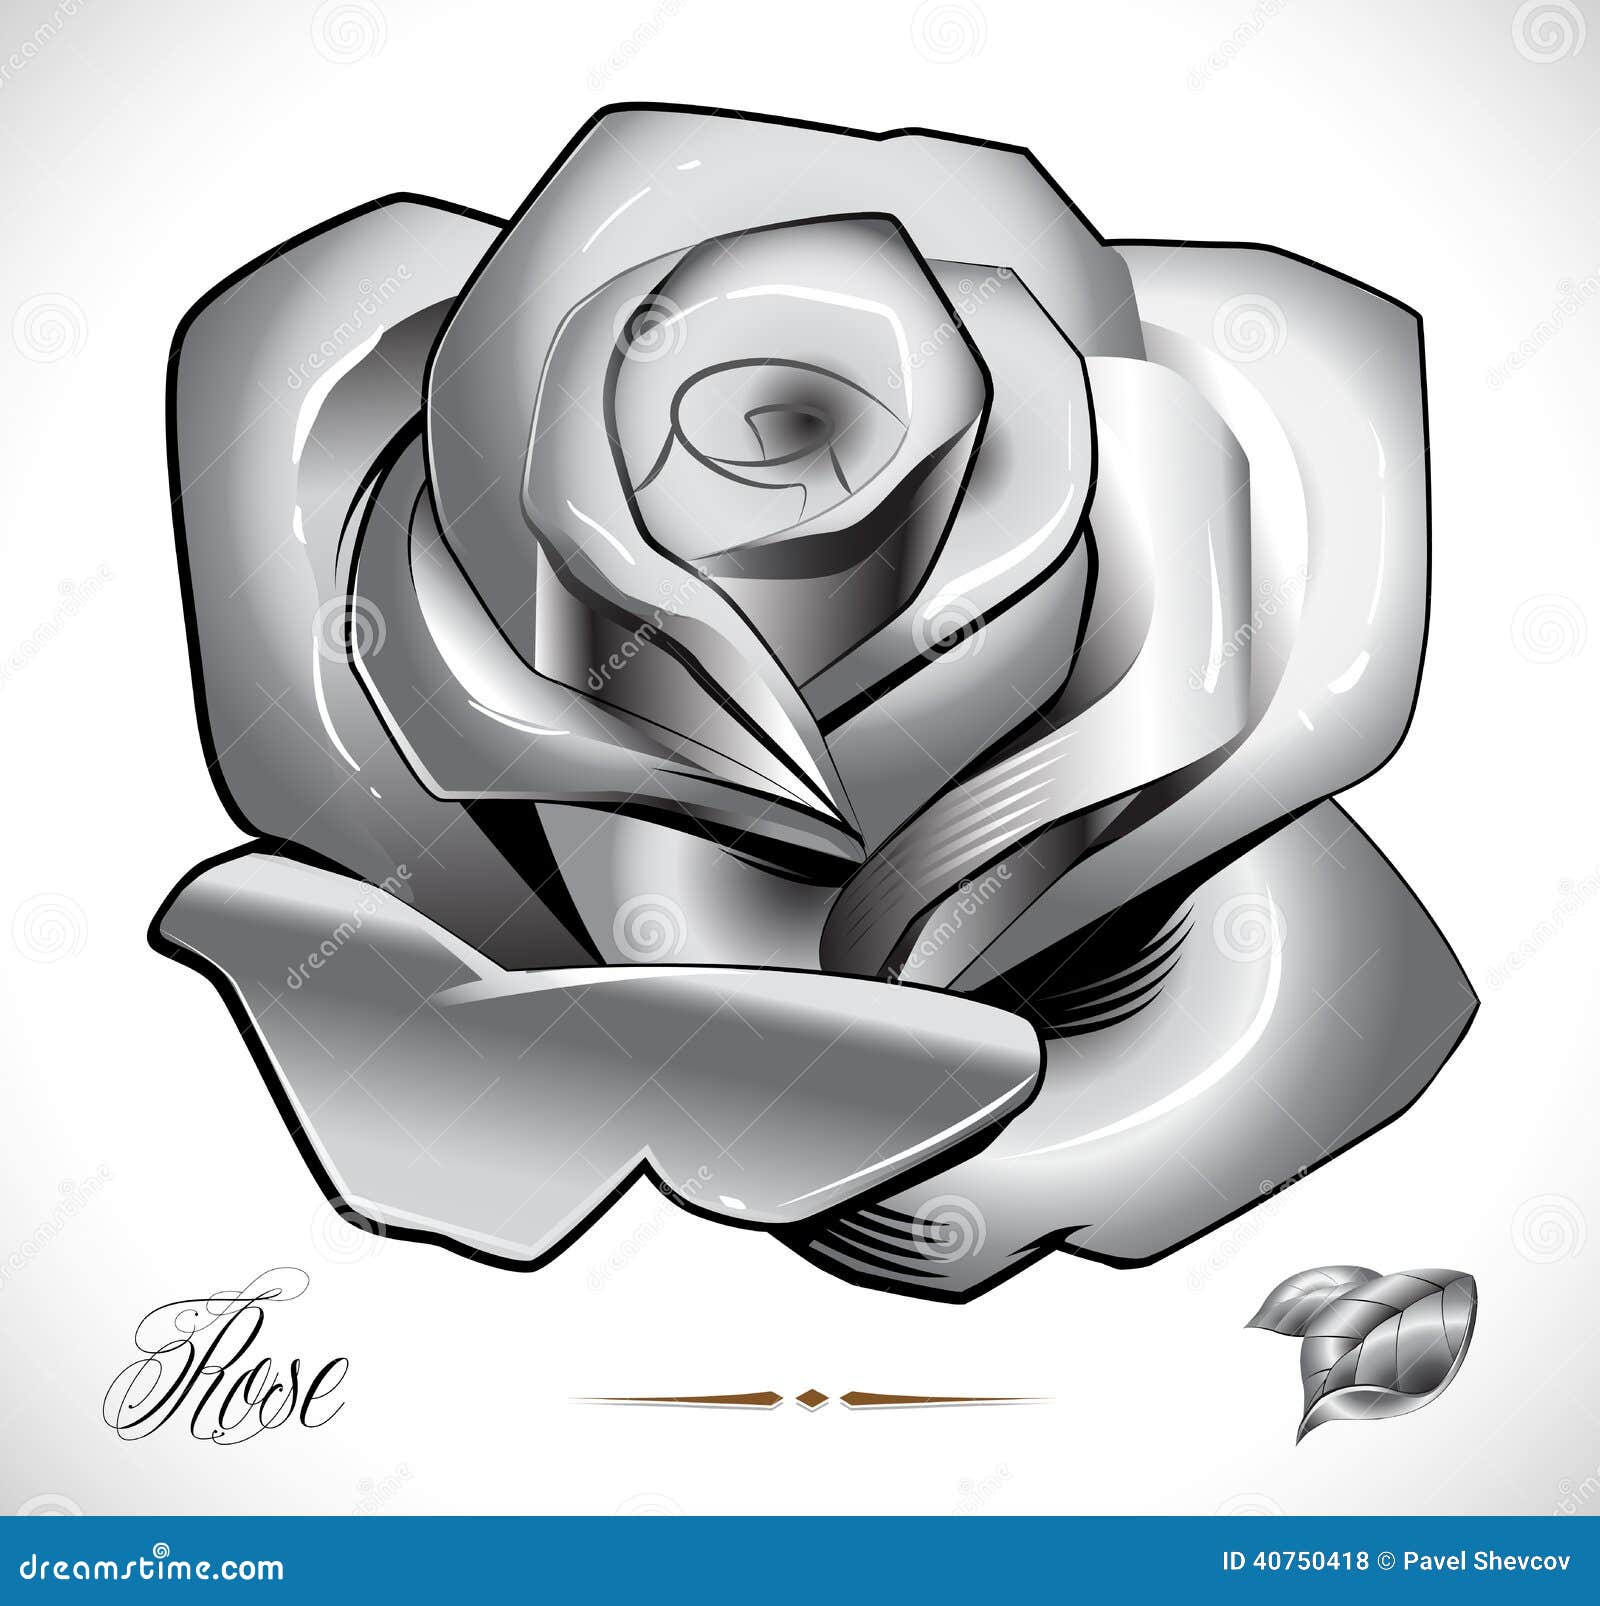 Honor And Glory Tattoo NC  Chicano style Freehand rose by Mike judeaart  blackandgrey blackandgreytattoo freehand cholo chicanotattoo  honorandglorytattoonc honorandglorytattoo rose rosetattoo tattoos  tattoo camplejeune jacksonvillenc 